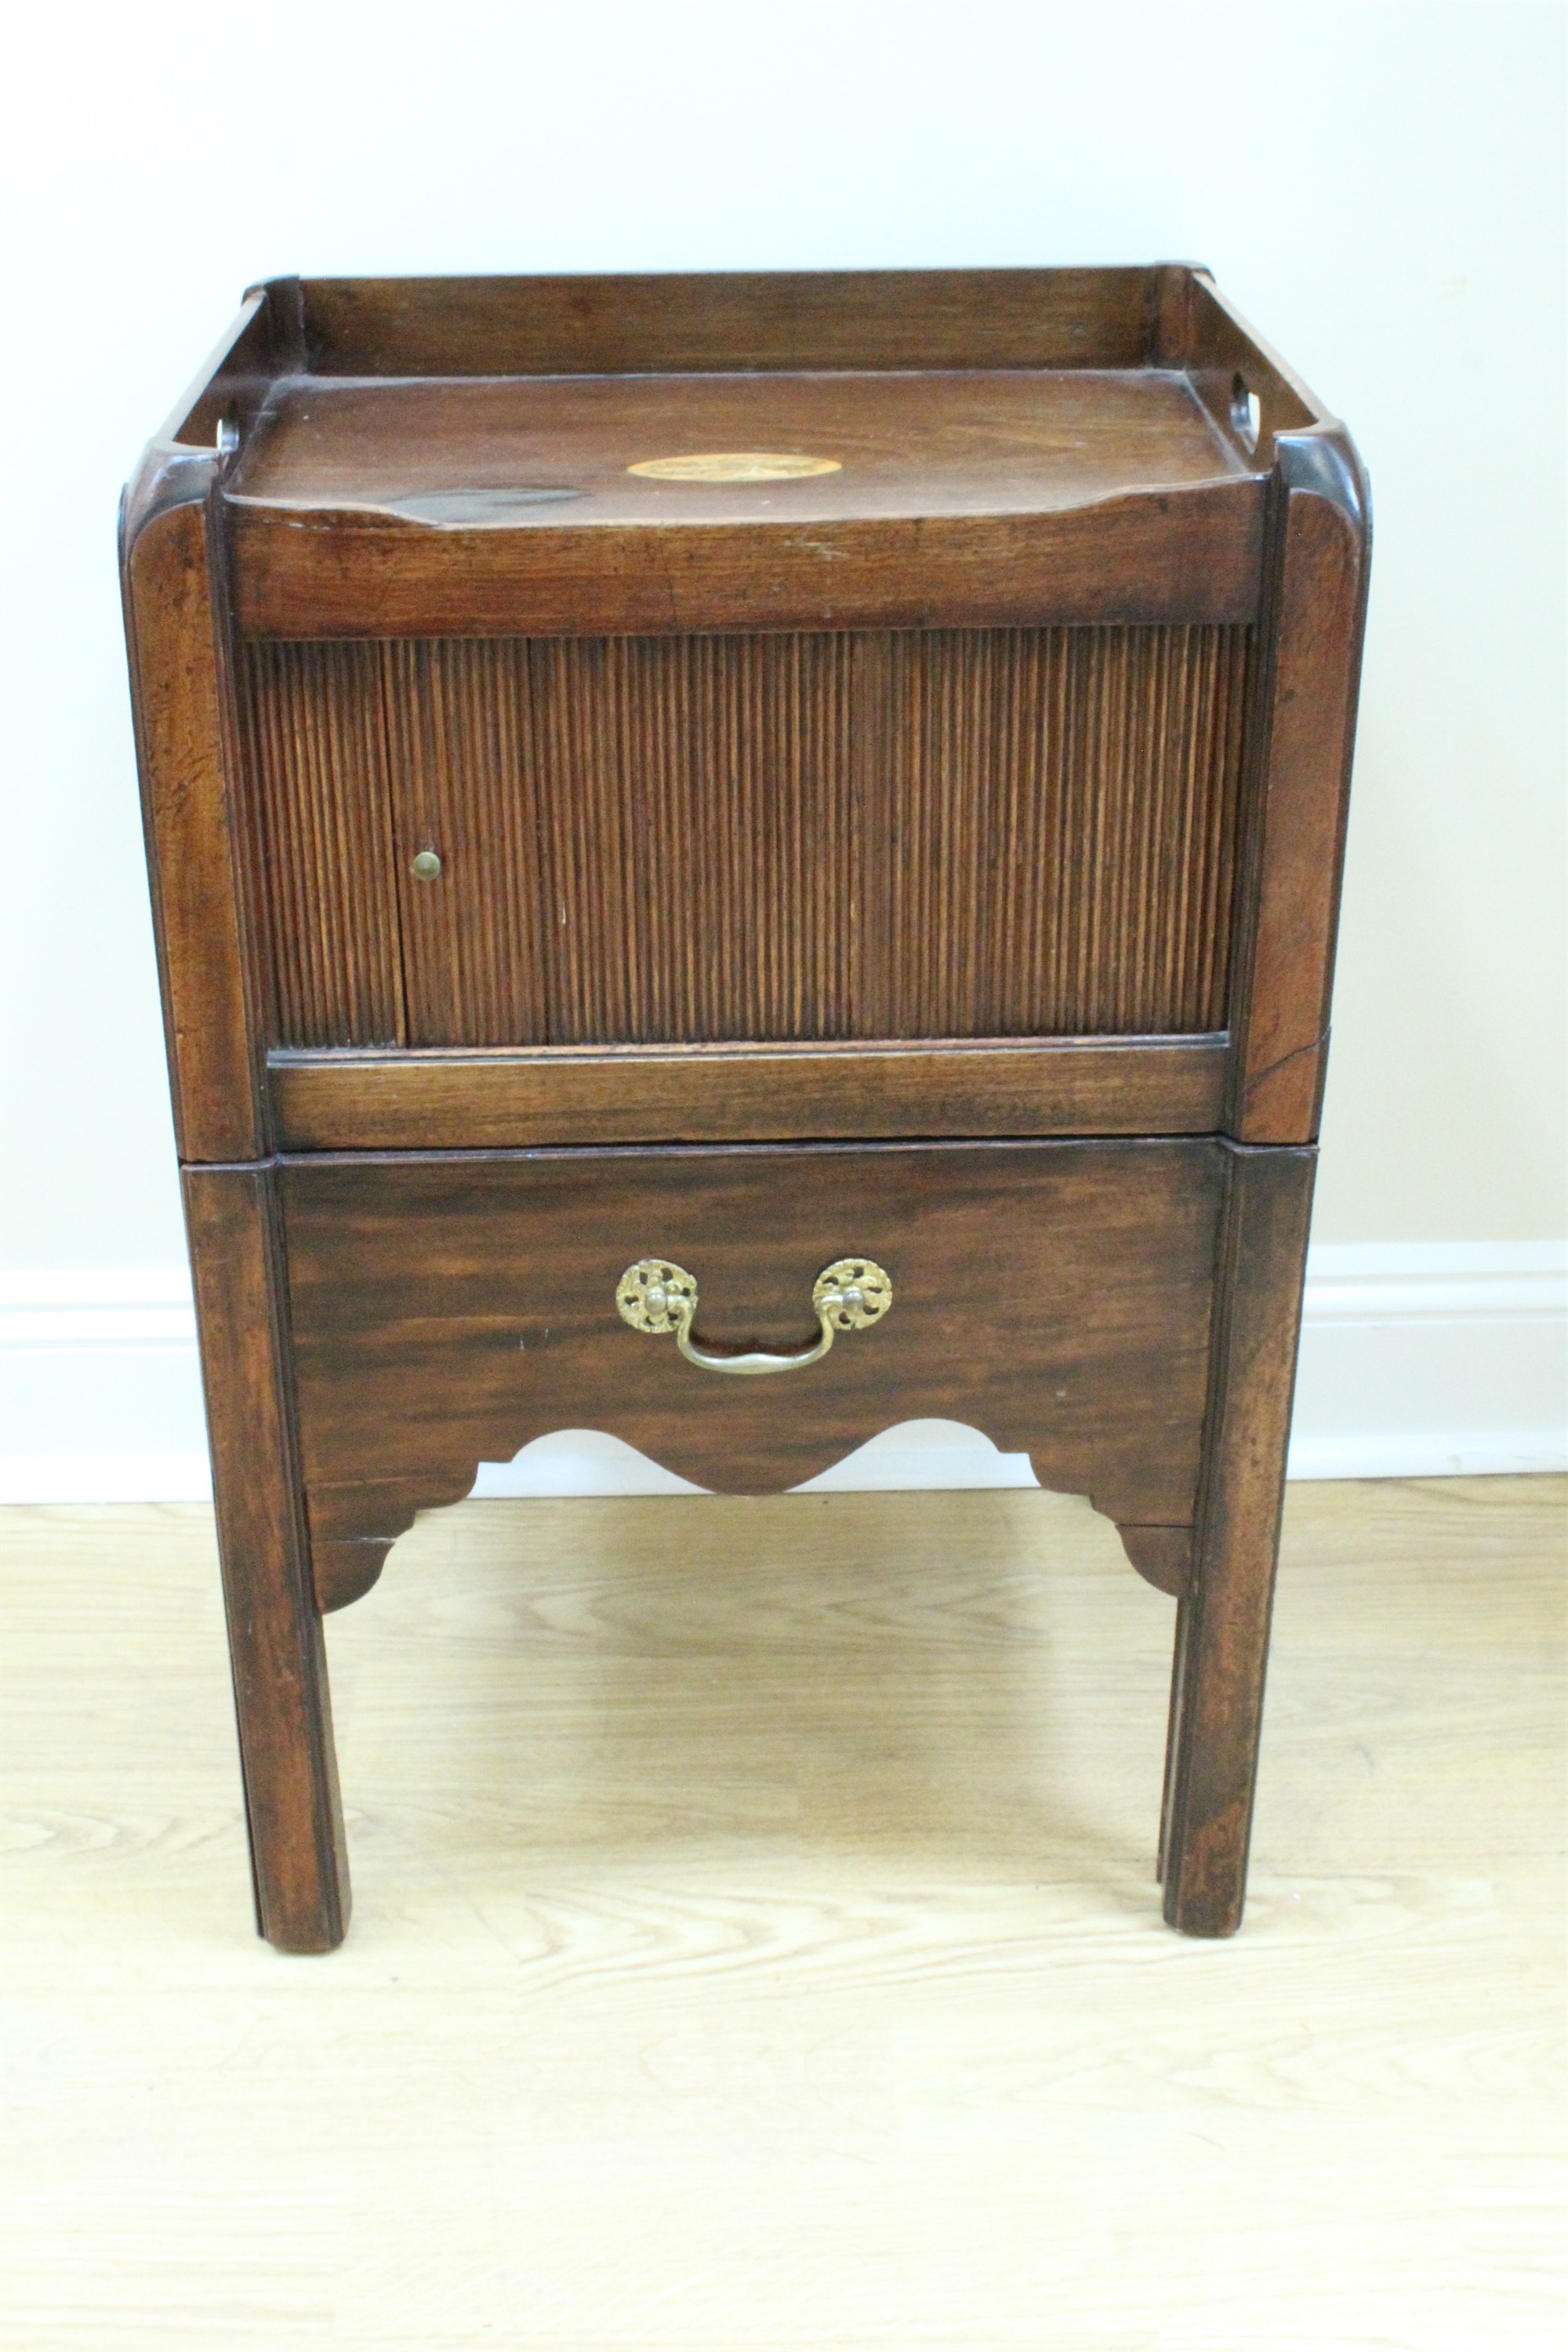 A George III marquetry-inlaid mahogany night stand